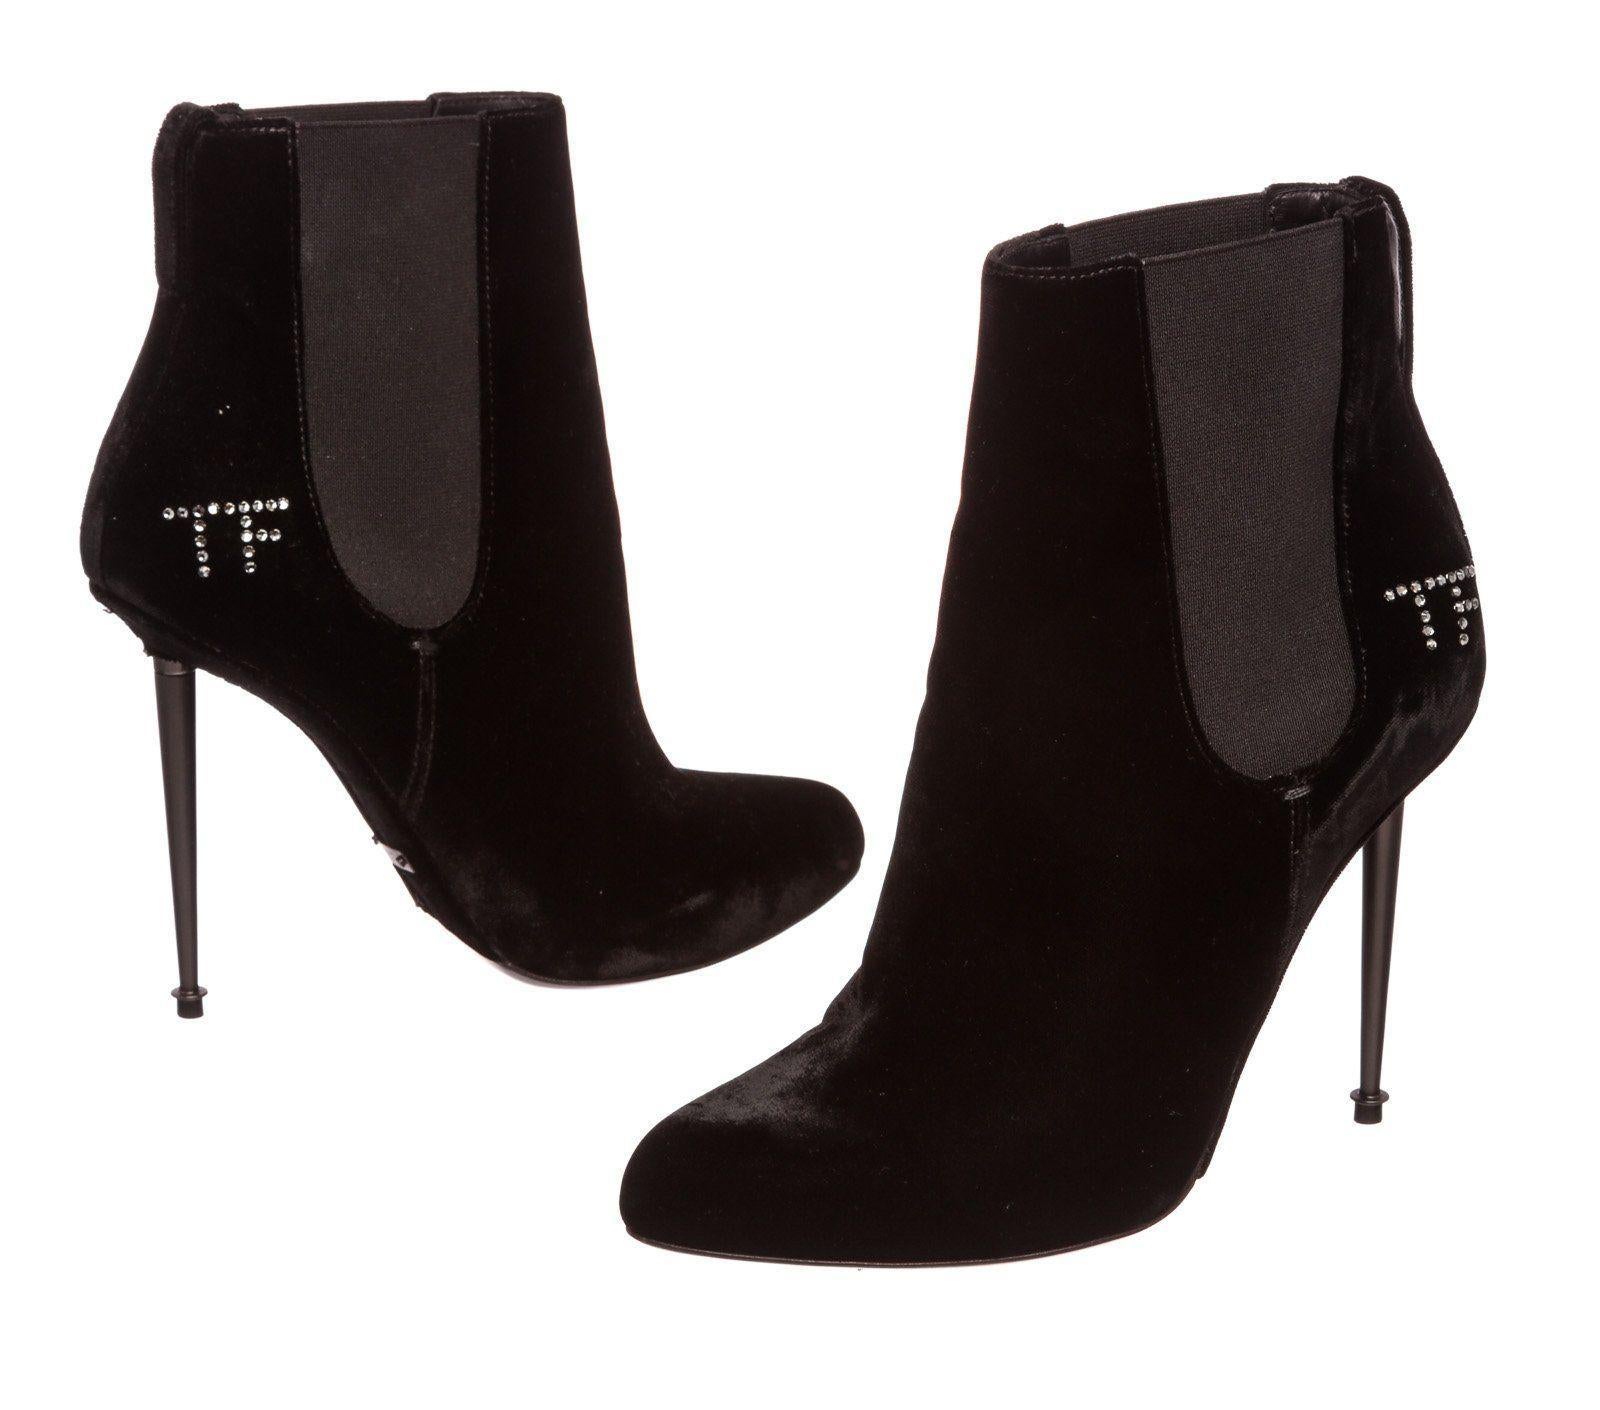 Black velvet Tom Ford Spiked boots with crystal TF logo embellishment.

23110MSC


Measurements:
	Length: 10.5 in / 27 cm
	Width: 4.5 in / 11 cm
CONDITION: Pre-Owned
Good overall, please see photographs for detail.